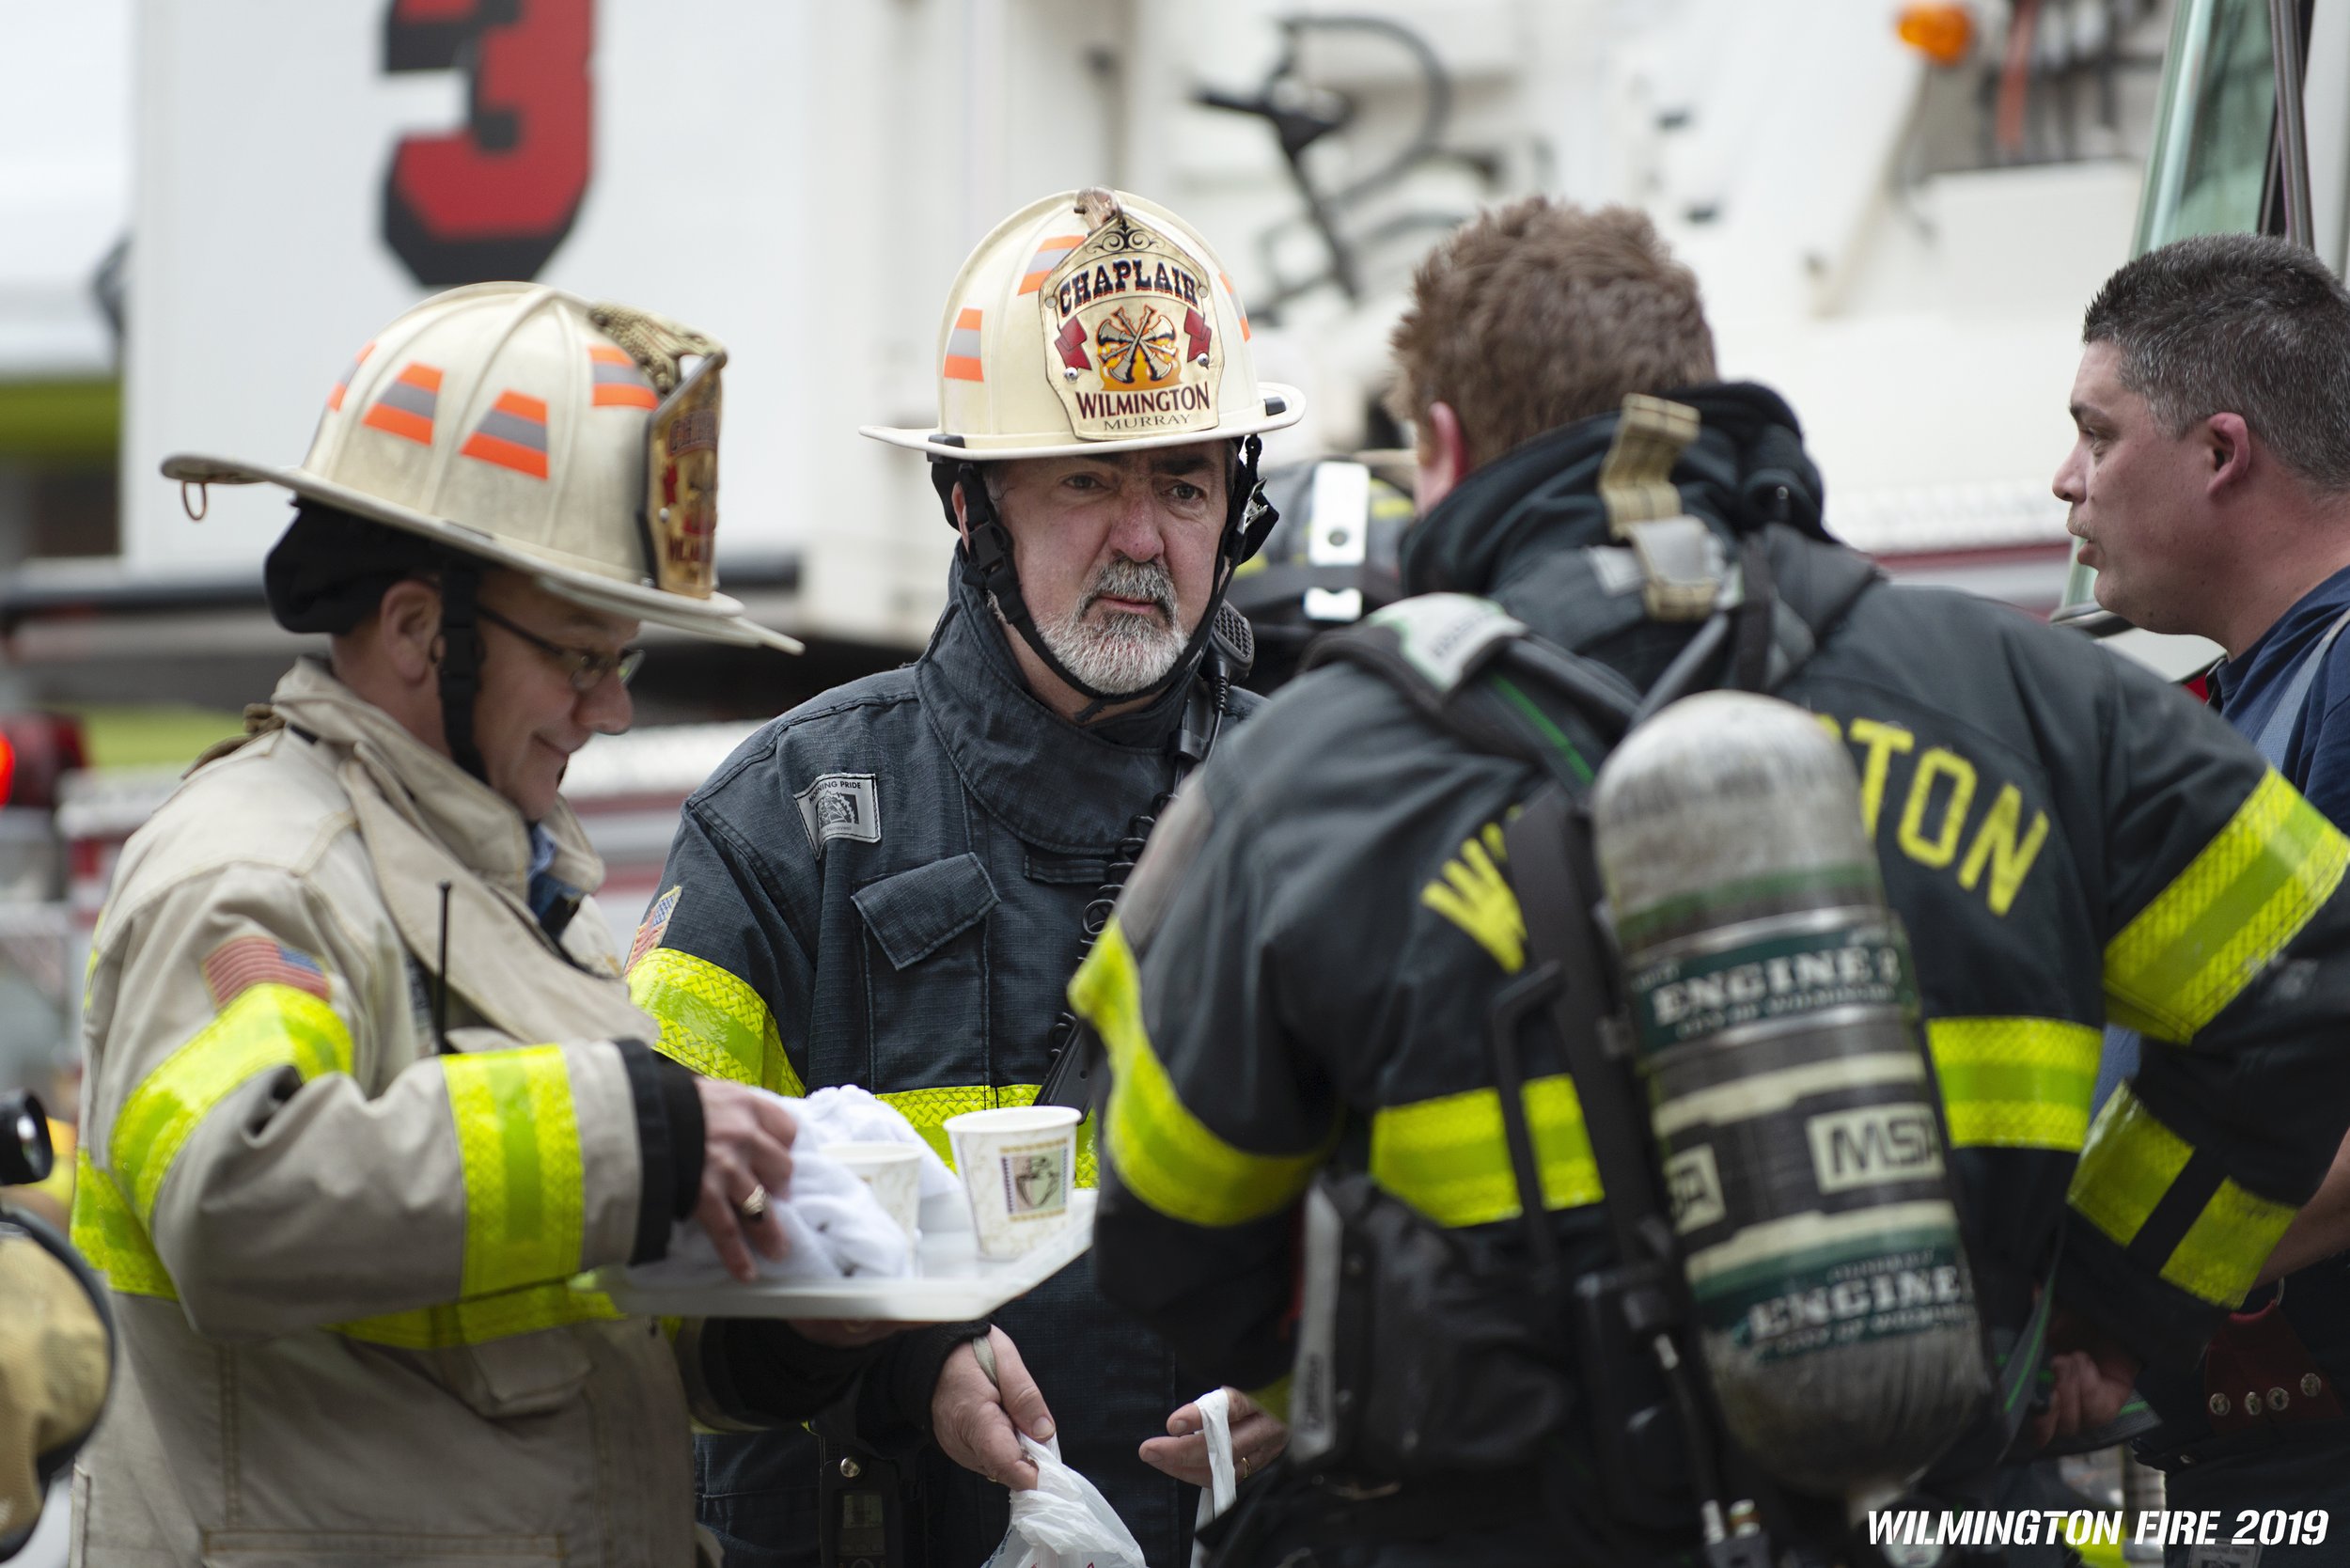  Rev. Michael S. Murray, OSFS, Assistant Provincial and Chaplain for the Wilmington Fire Department (WFD), confers with his fellow chaplain, Rev. Brad Martin, and WFD firefighters at a recent fire. 